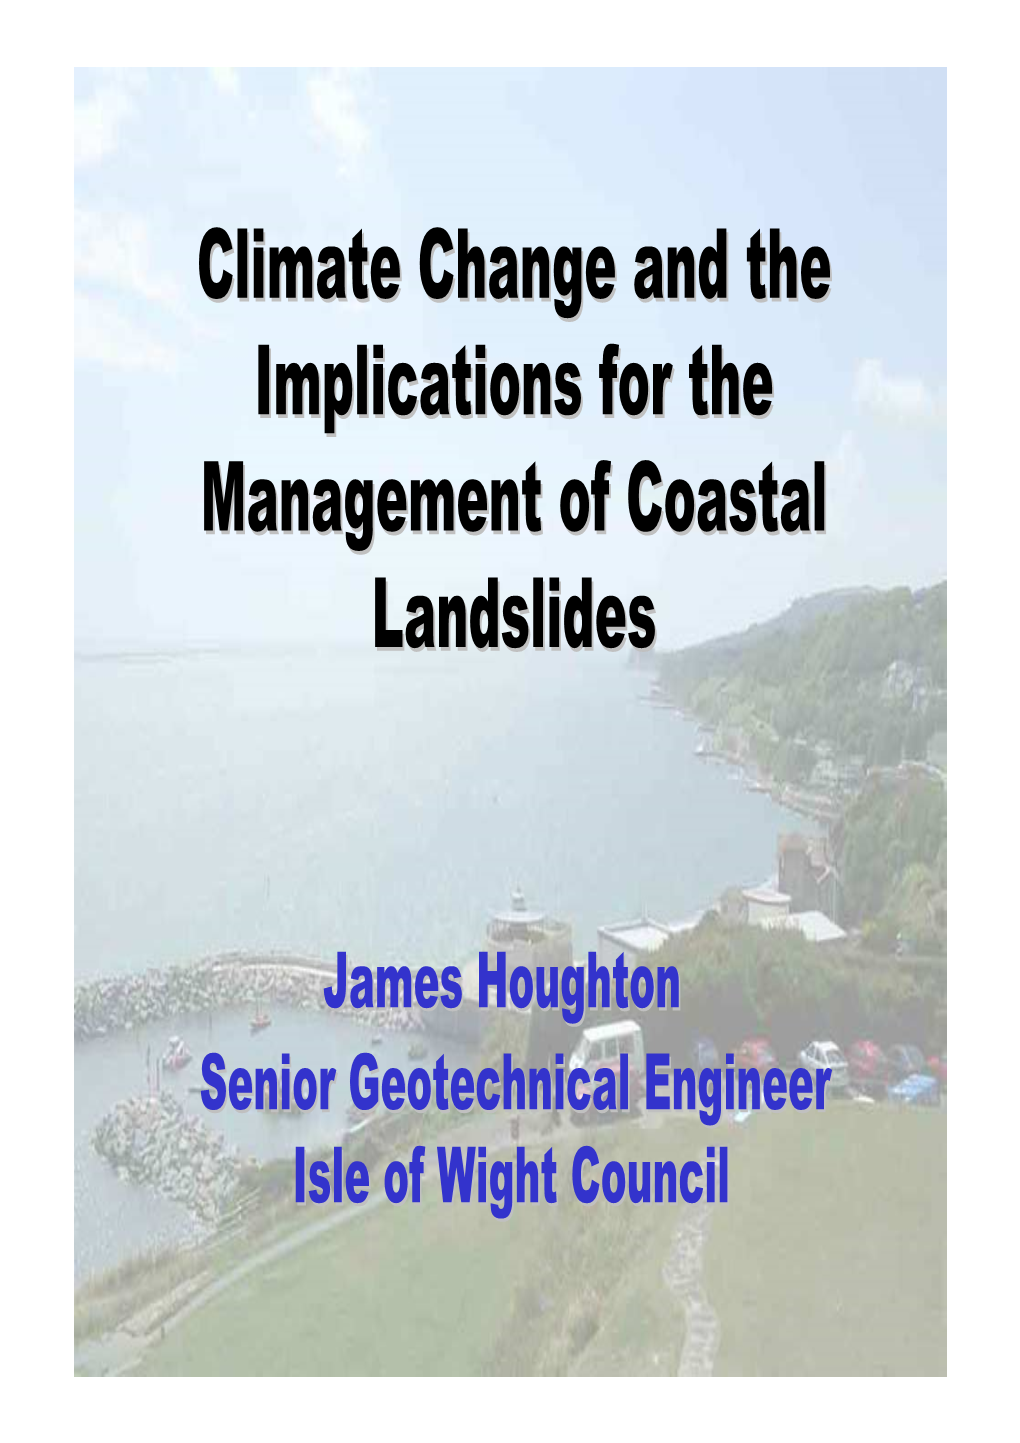 Climate Change and the Implications for the Management of Coastal